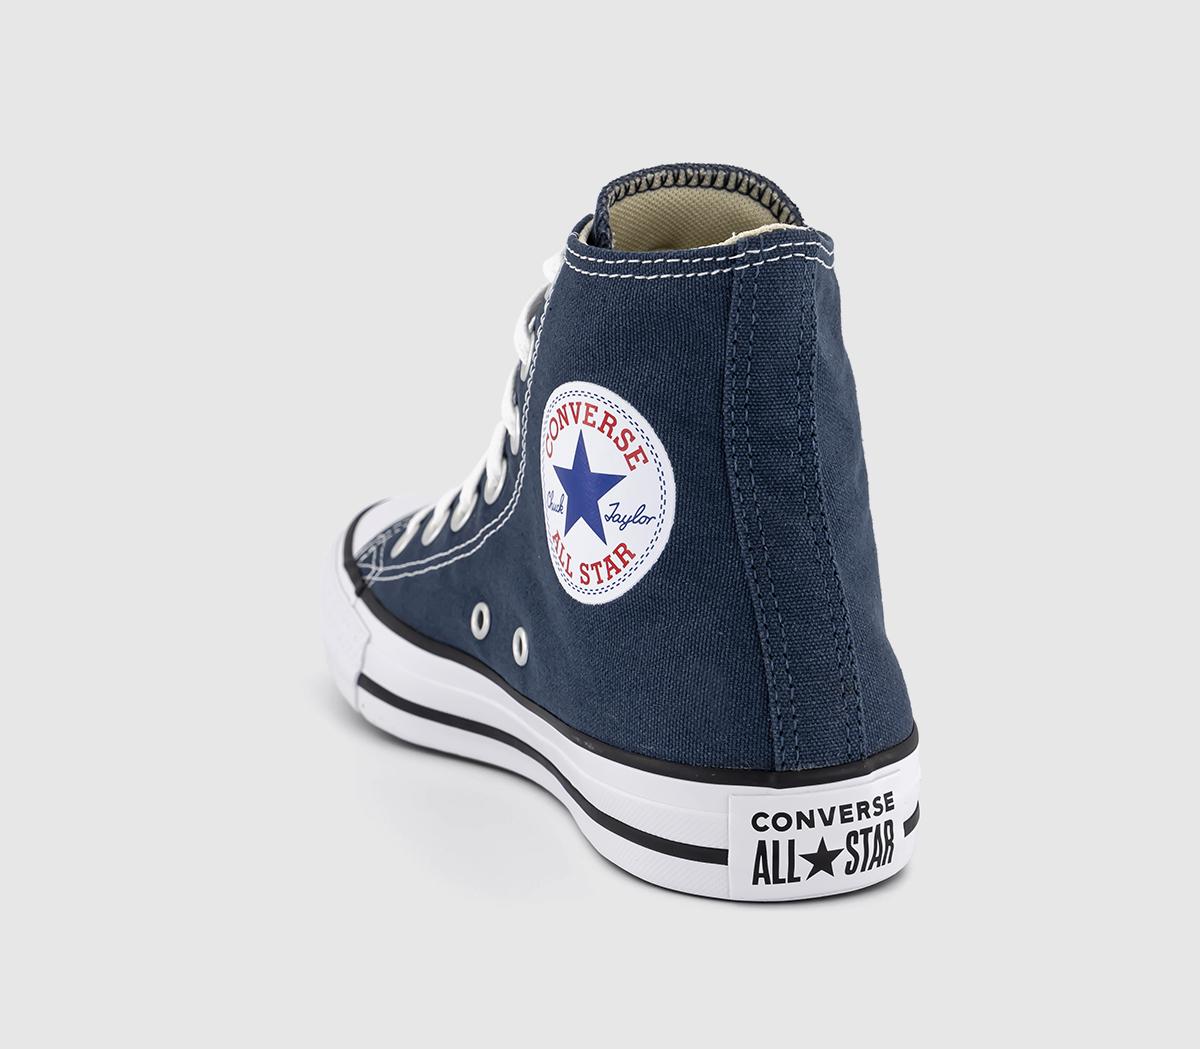 Converse All Star Hi Trainers Navy Canvas - Unisex Sports